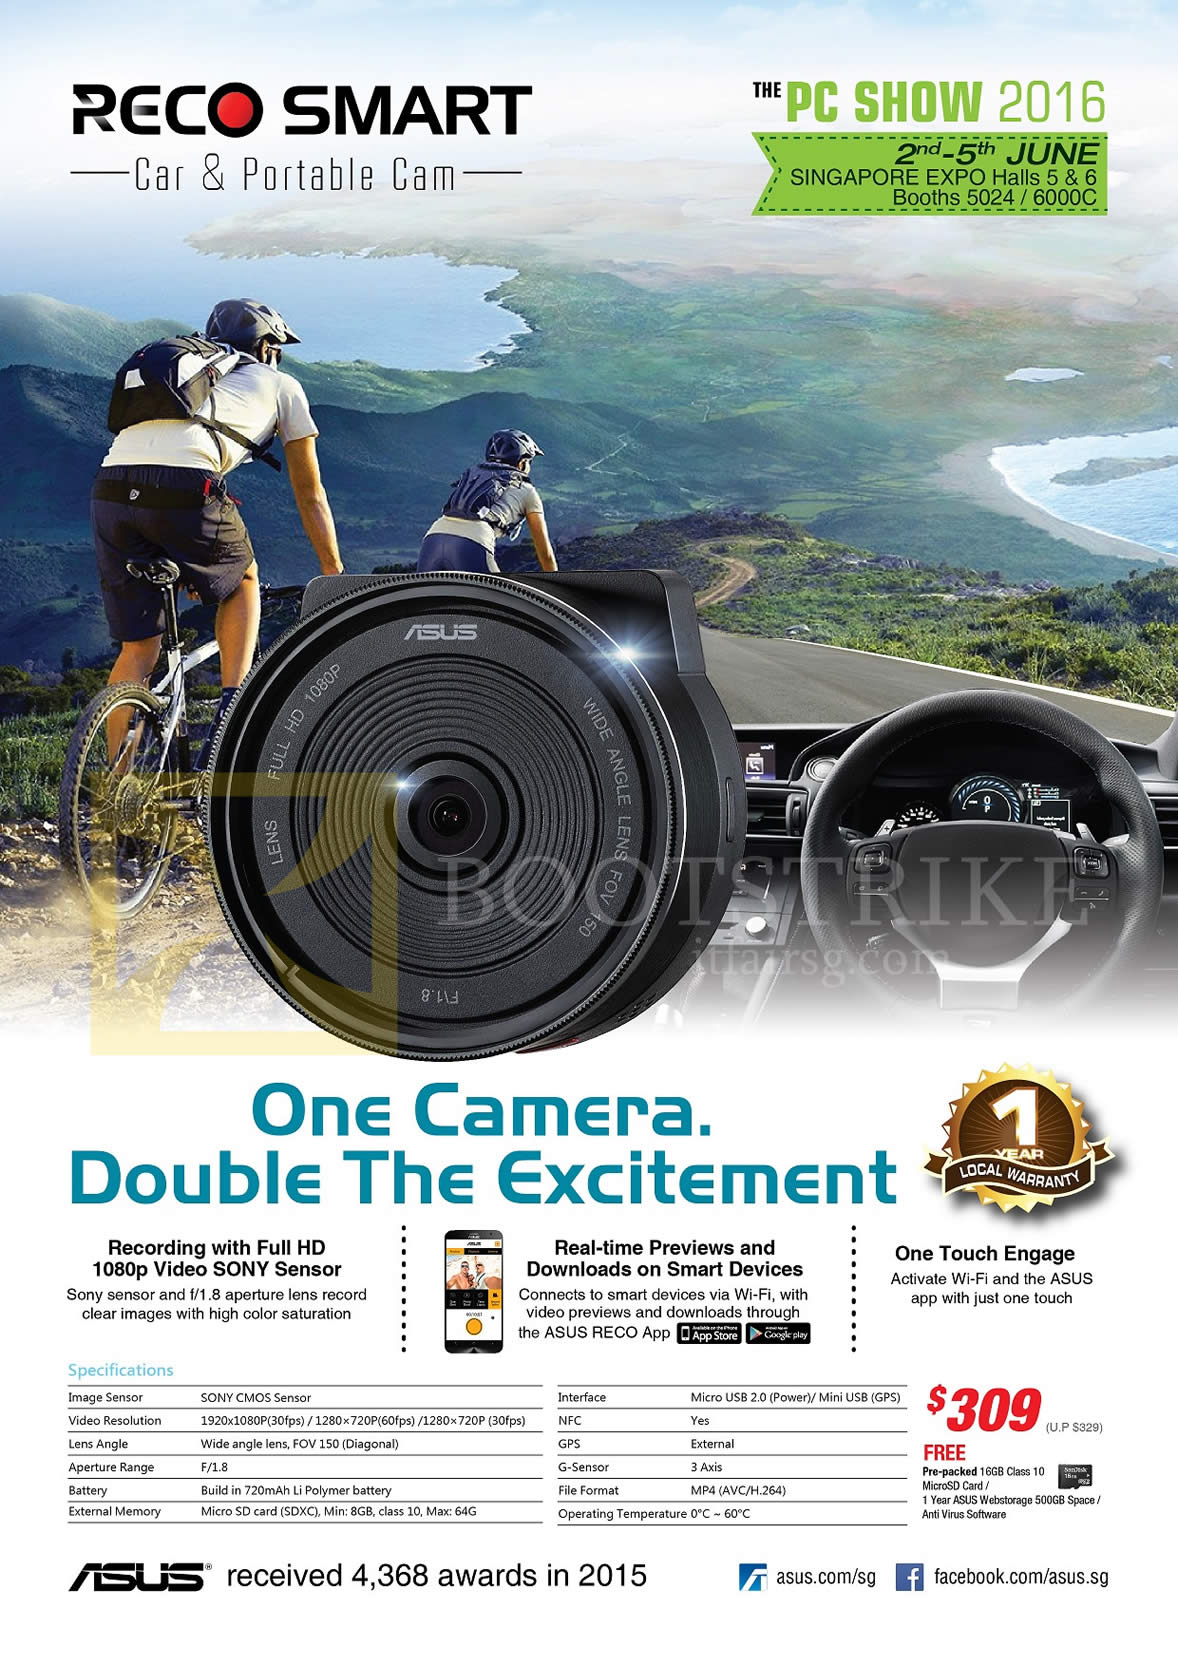 PC SHOW 2016 price list image brochure of ASUS RECO Car Cam